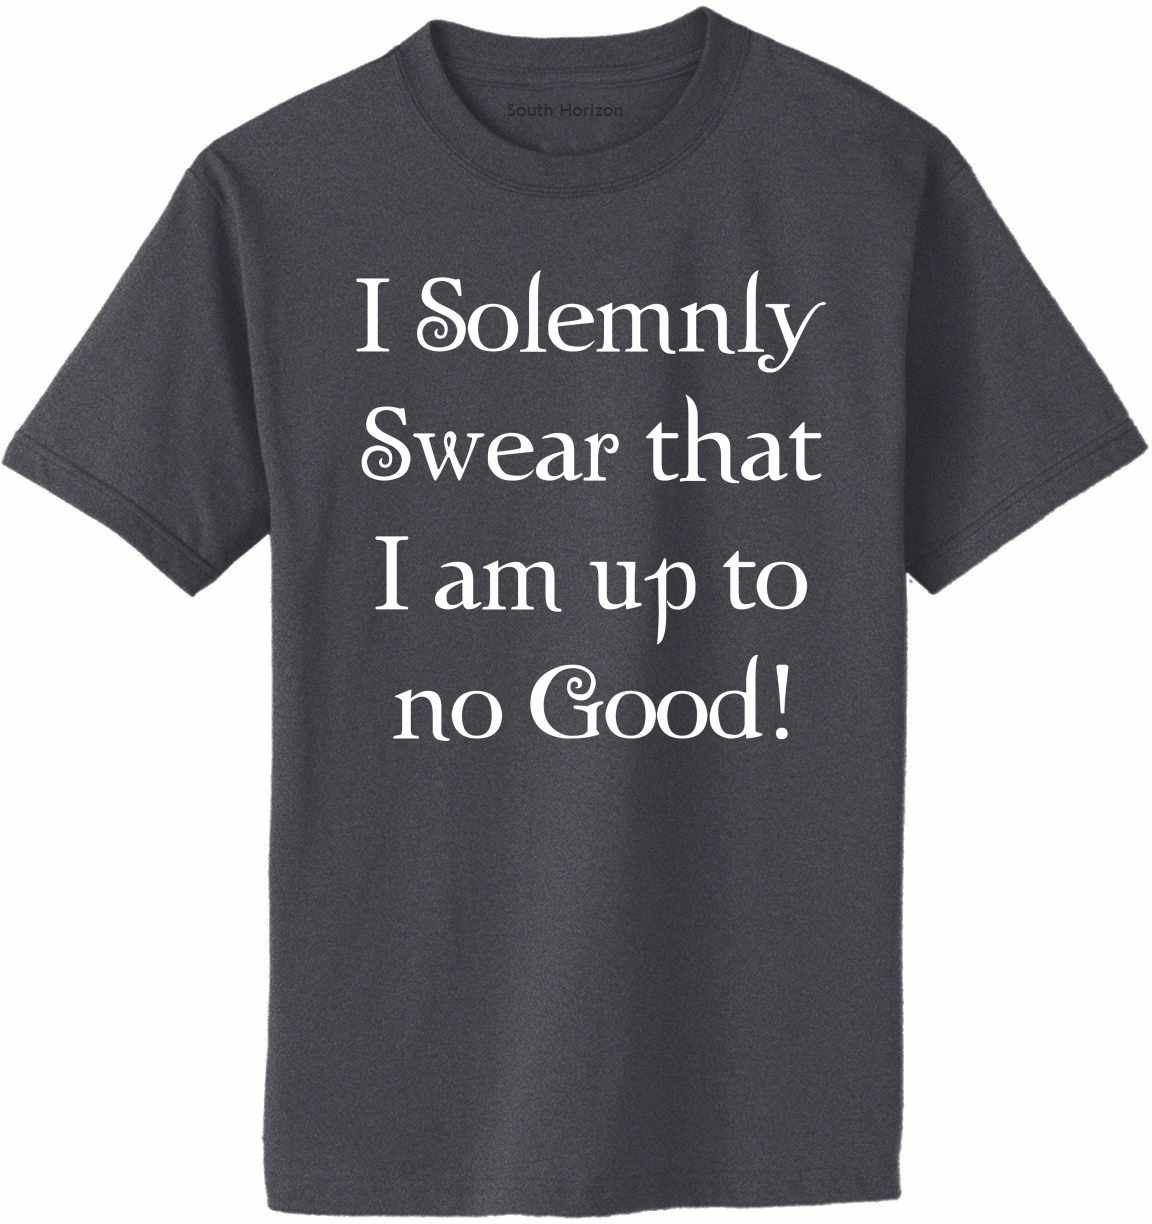 I Solemnly Swear that I am up to No Good! Adult T-Shirt (#739-1)